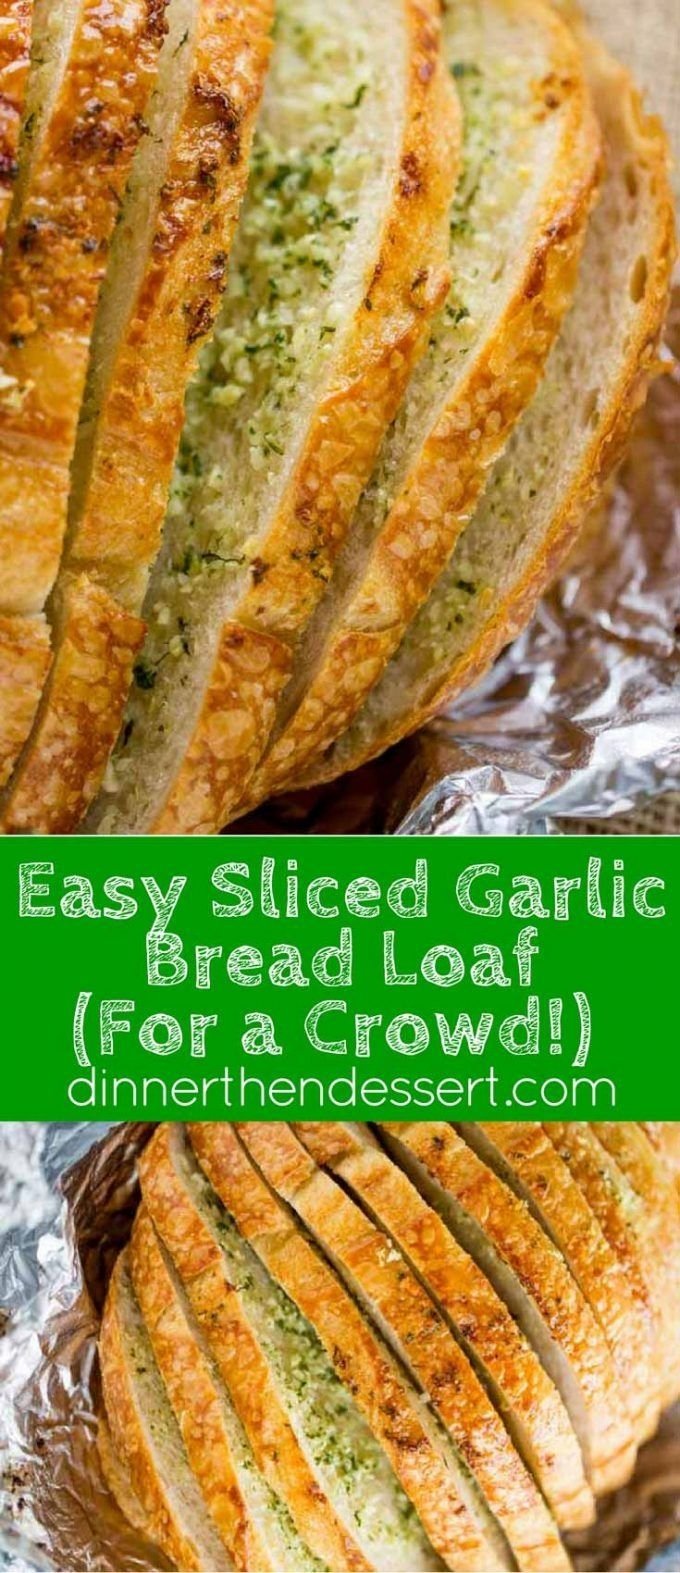 10 Spectacular Dinner Ideas For A Large Group 121 best meals for large groups images on pinterest clean eating 3 2022